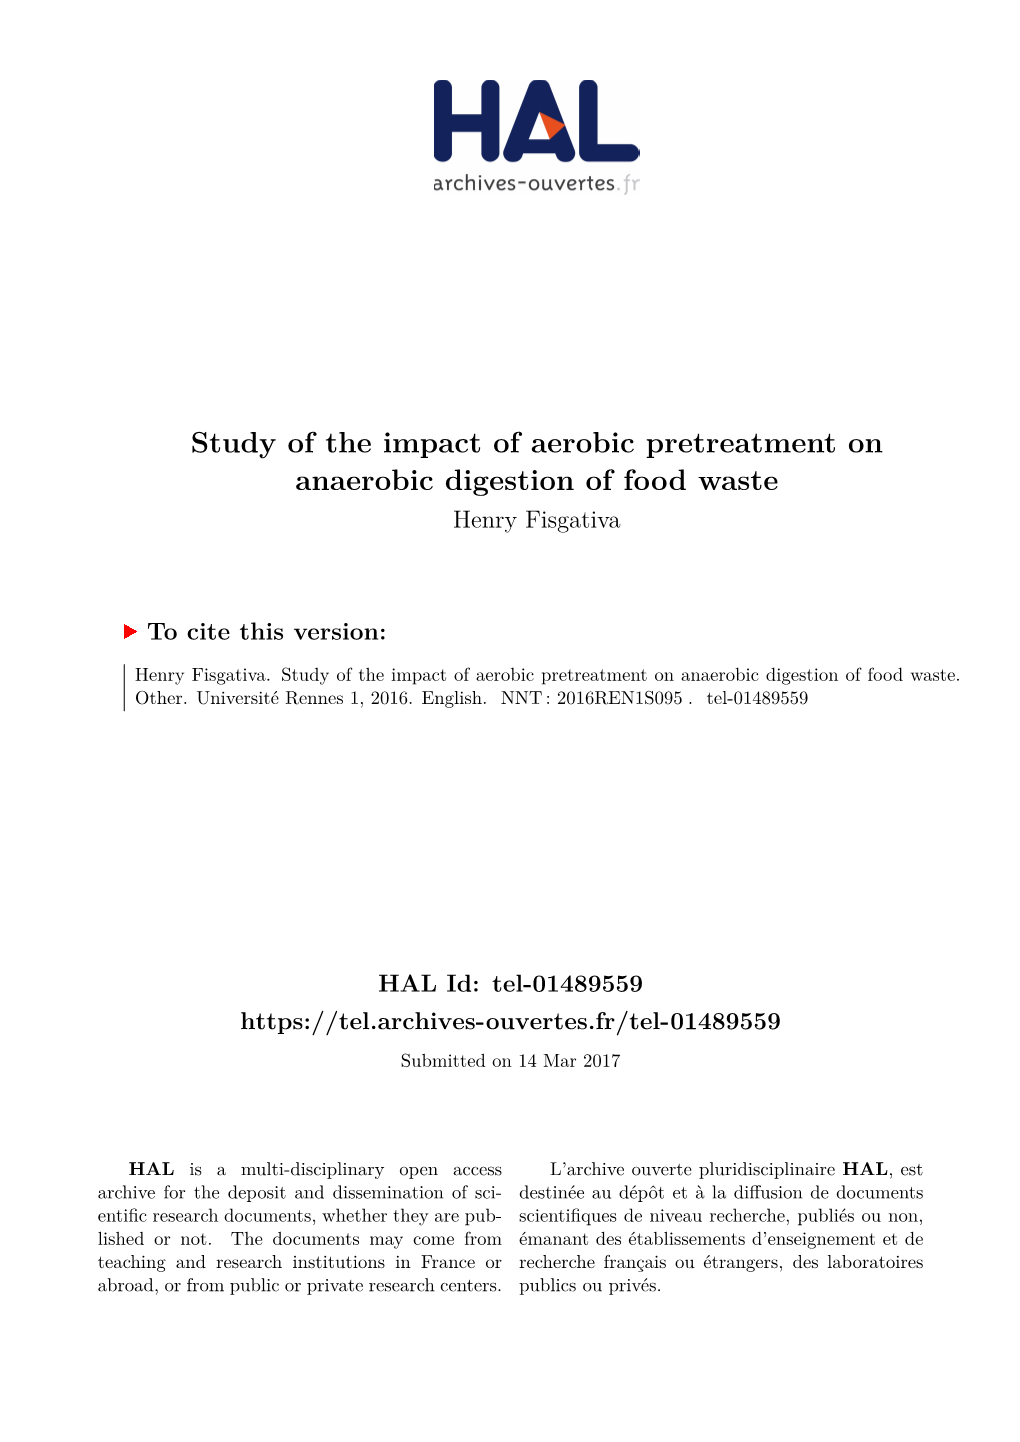 Study of the Impact of Aerobic Pretreatment on Anaerobic Digestion of Food Waste Henry Fisgativa